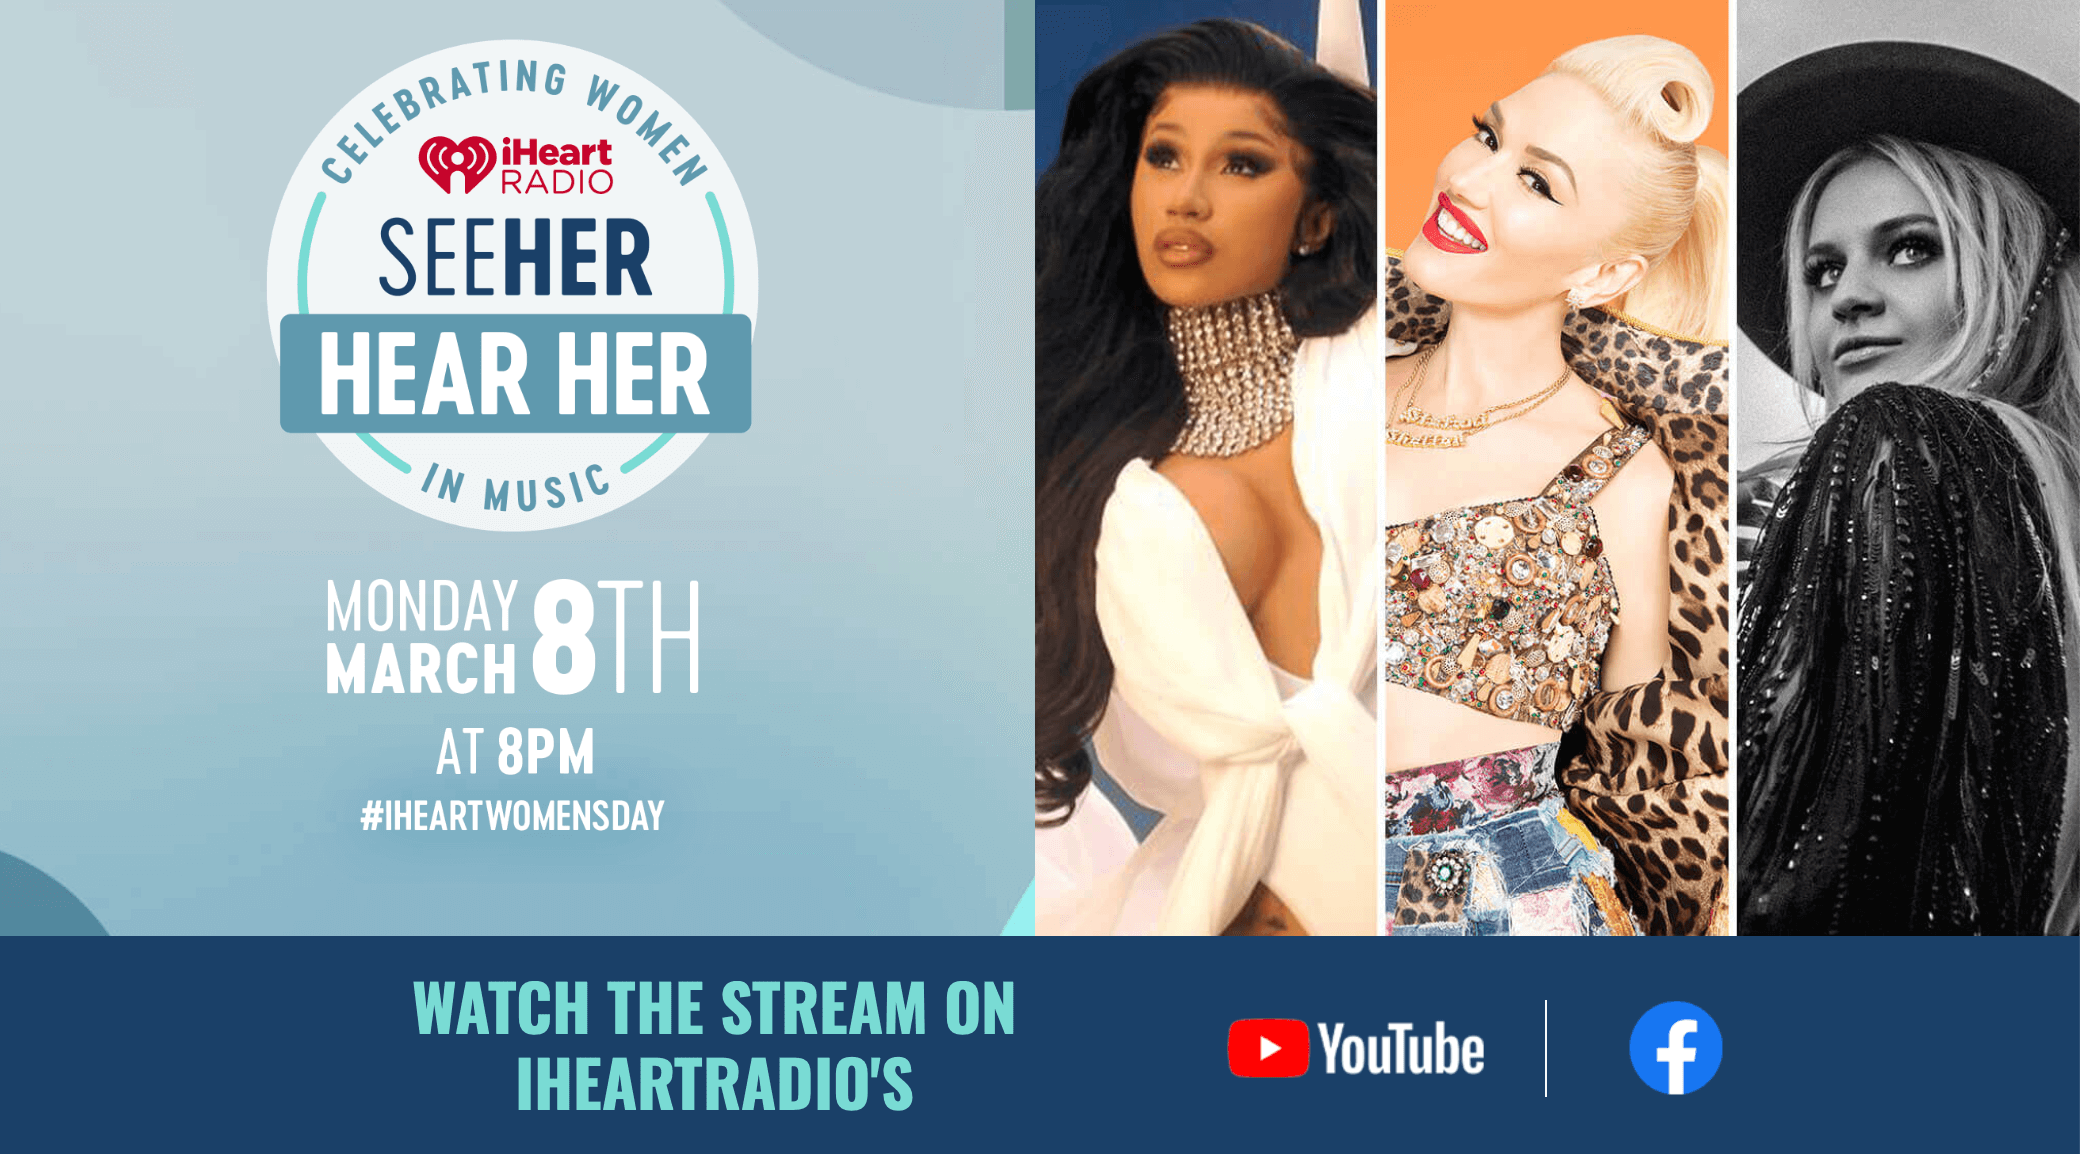 iHeartMedia And SeeHer Team Up To Celebrate International Women’s Day With “iHeartRadio Presents SeeHer Hear Her: Celebrating Women In Music”